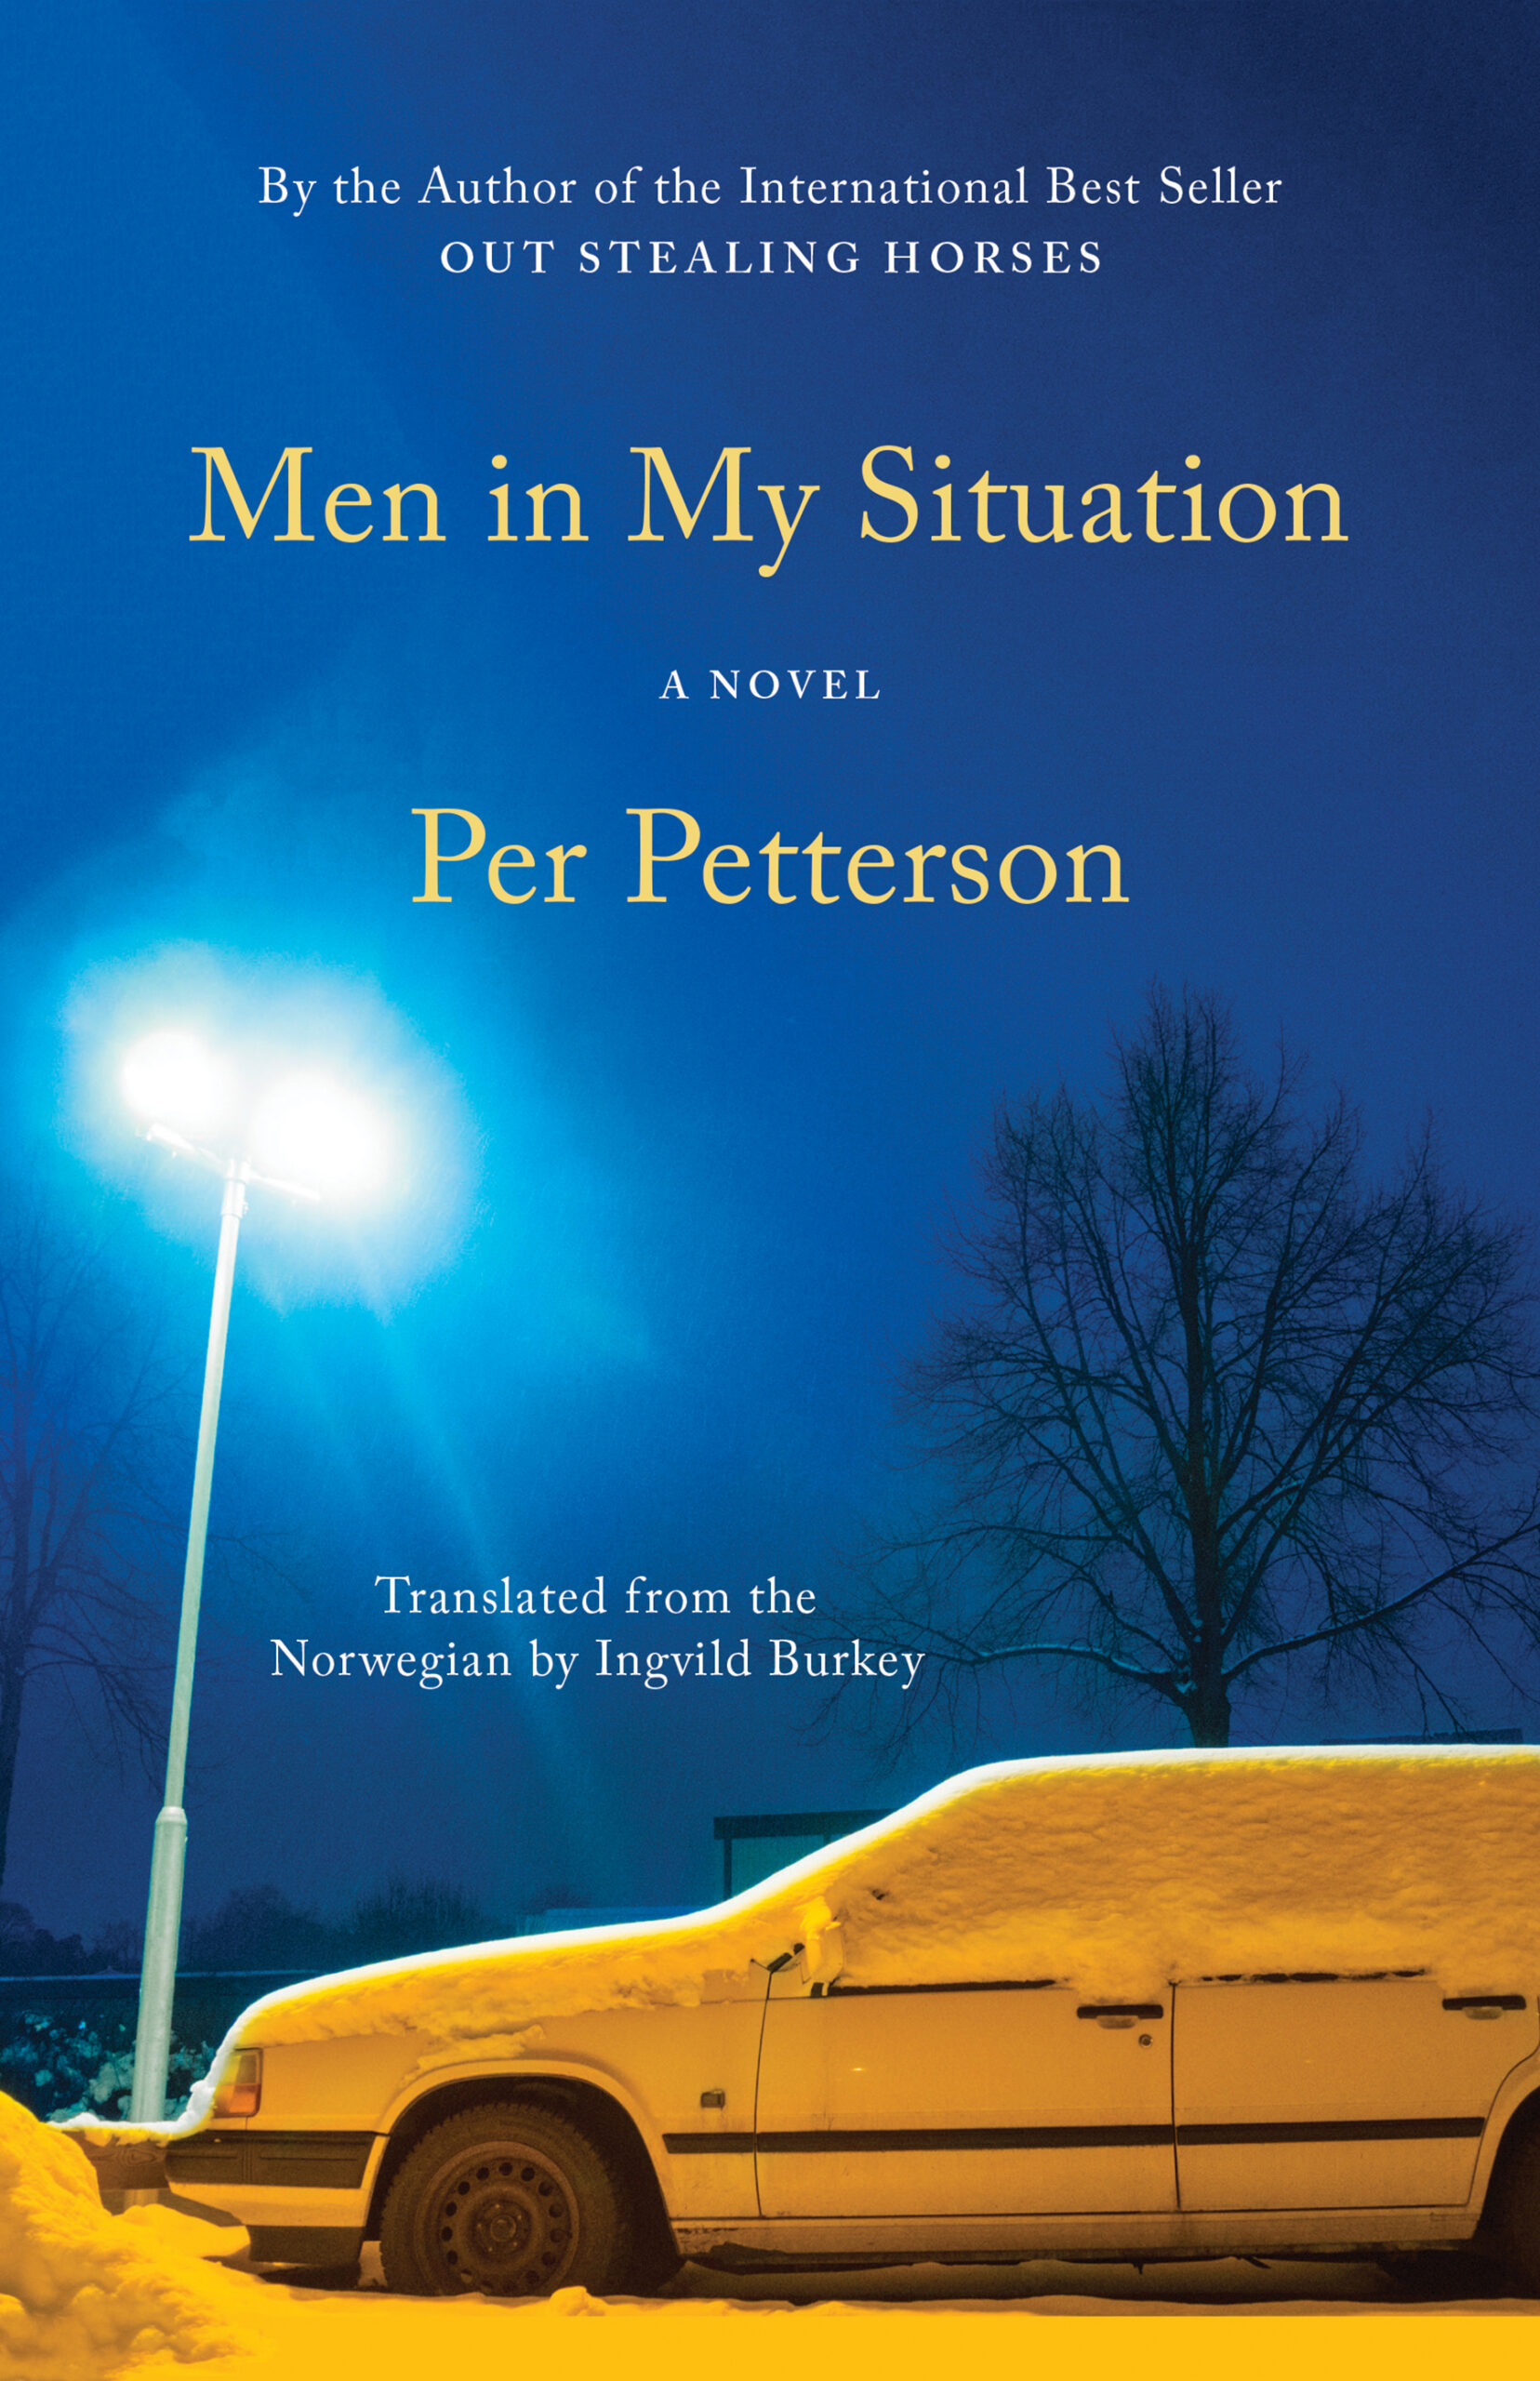 Cover of Per Petterson’s Men in My Situation, depicting a car covered in snow, a street light, and a dark sky.